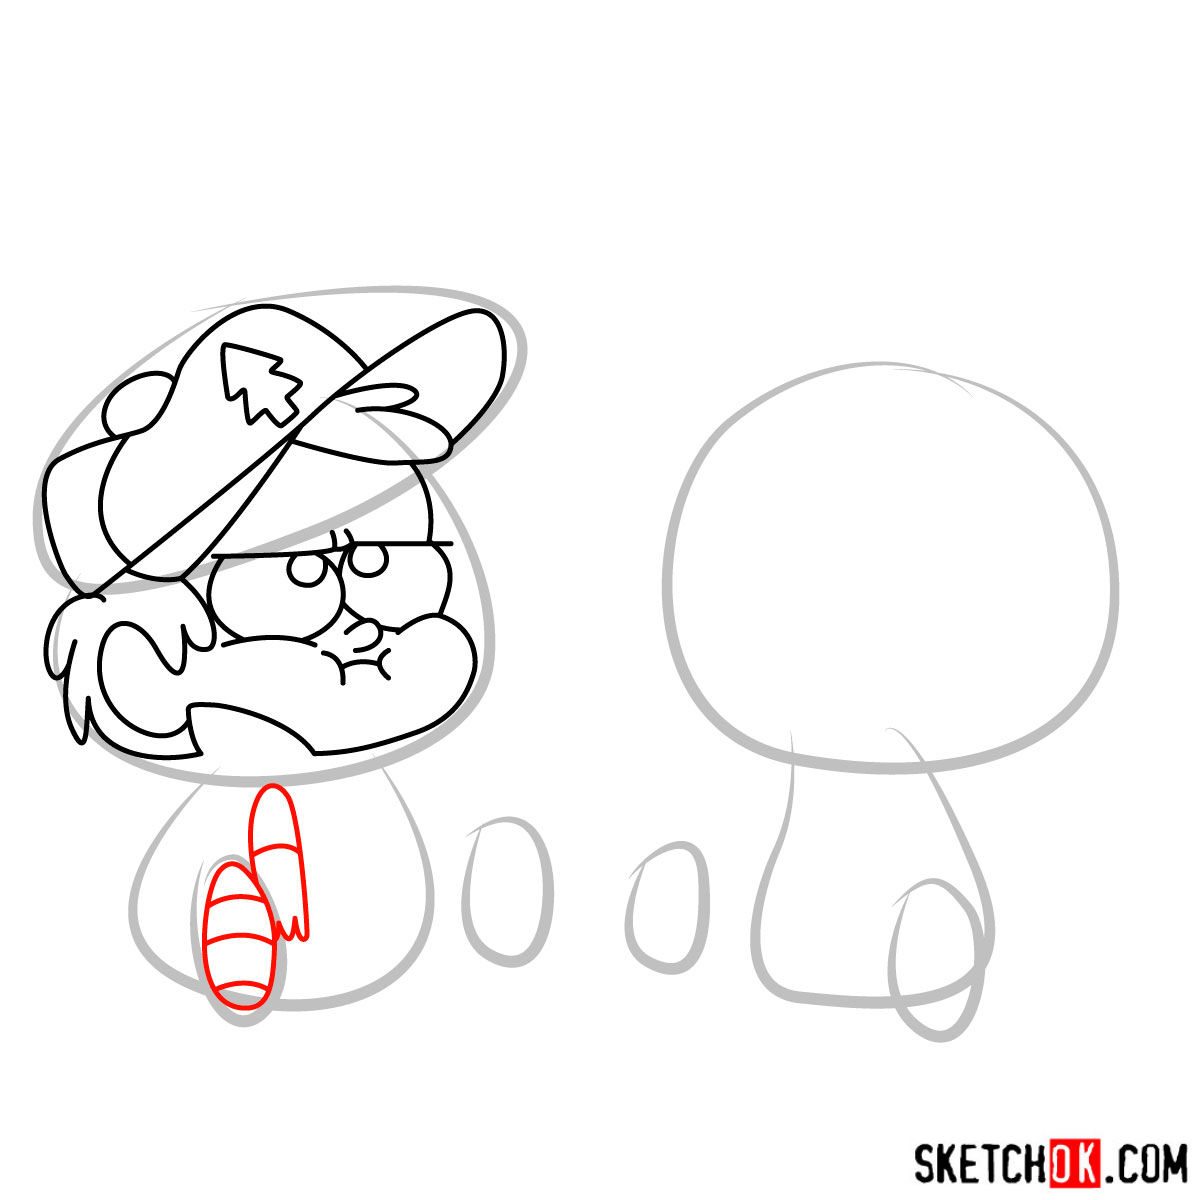 How to draw Dipper and Mabel Pines chibi style - step 05